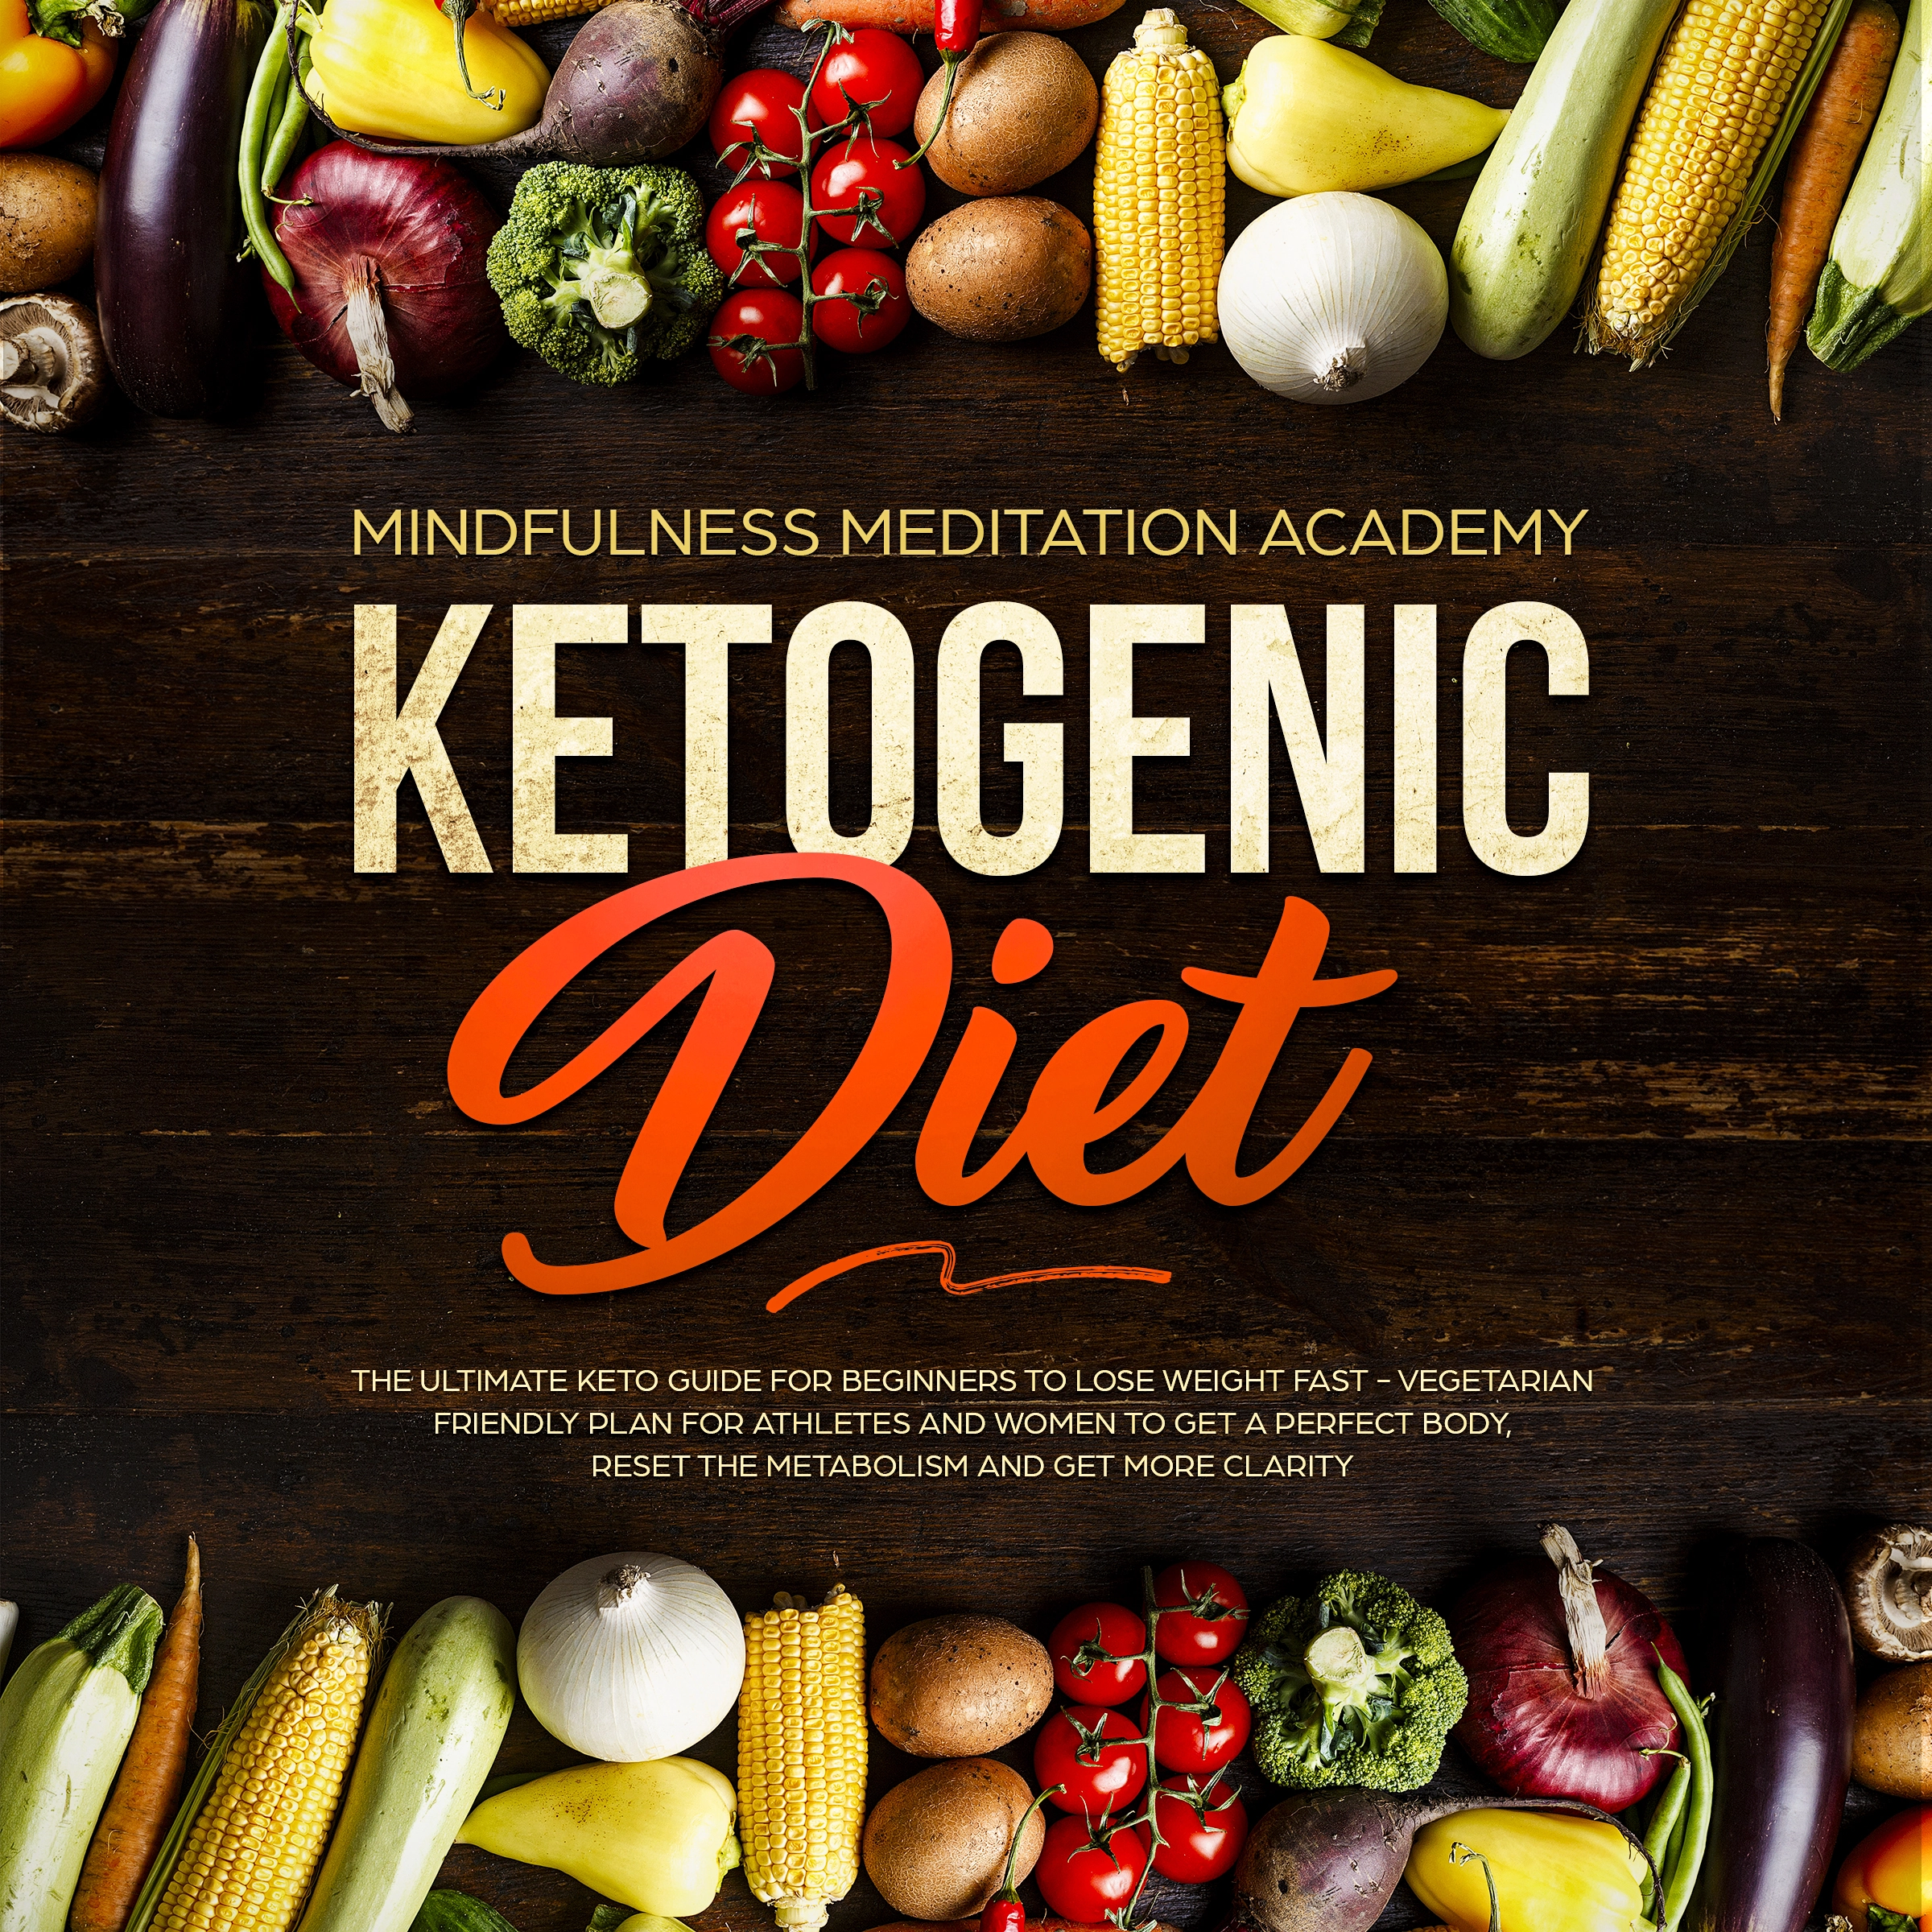 Ketogenic Diet: The Ultimate Keto Guide for Beginners to lose Weight fast – Vegetarian Friendly Plan for Athletes and Women to get a Perfect Body, reset the Metabolism and get more clarity Audiobook by Mindfulness Meditation Academy